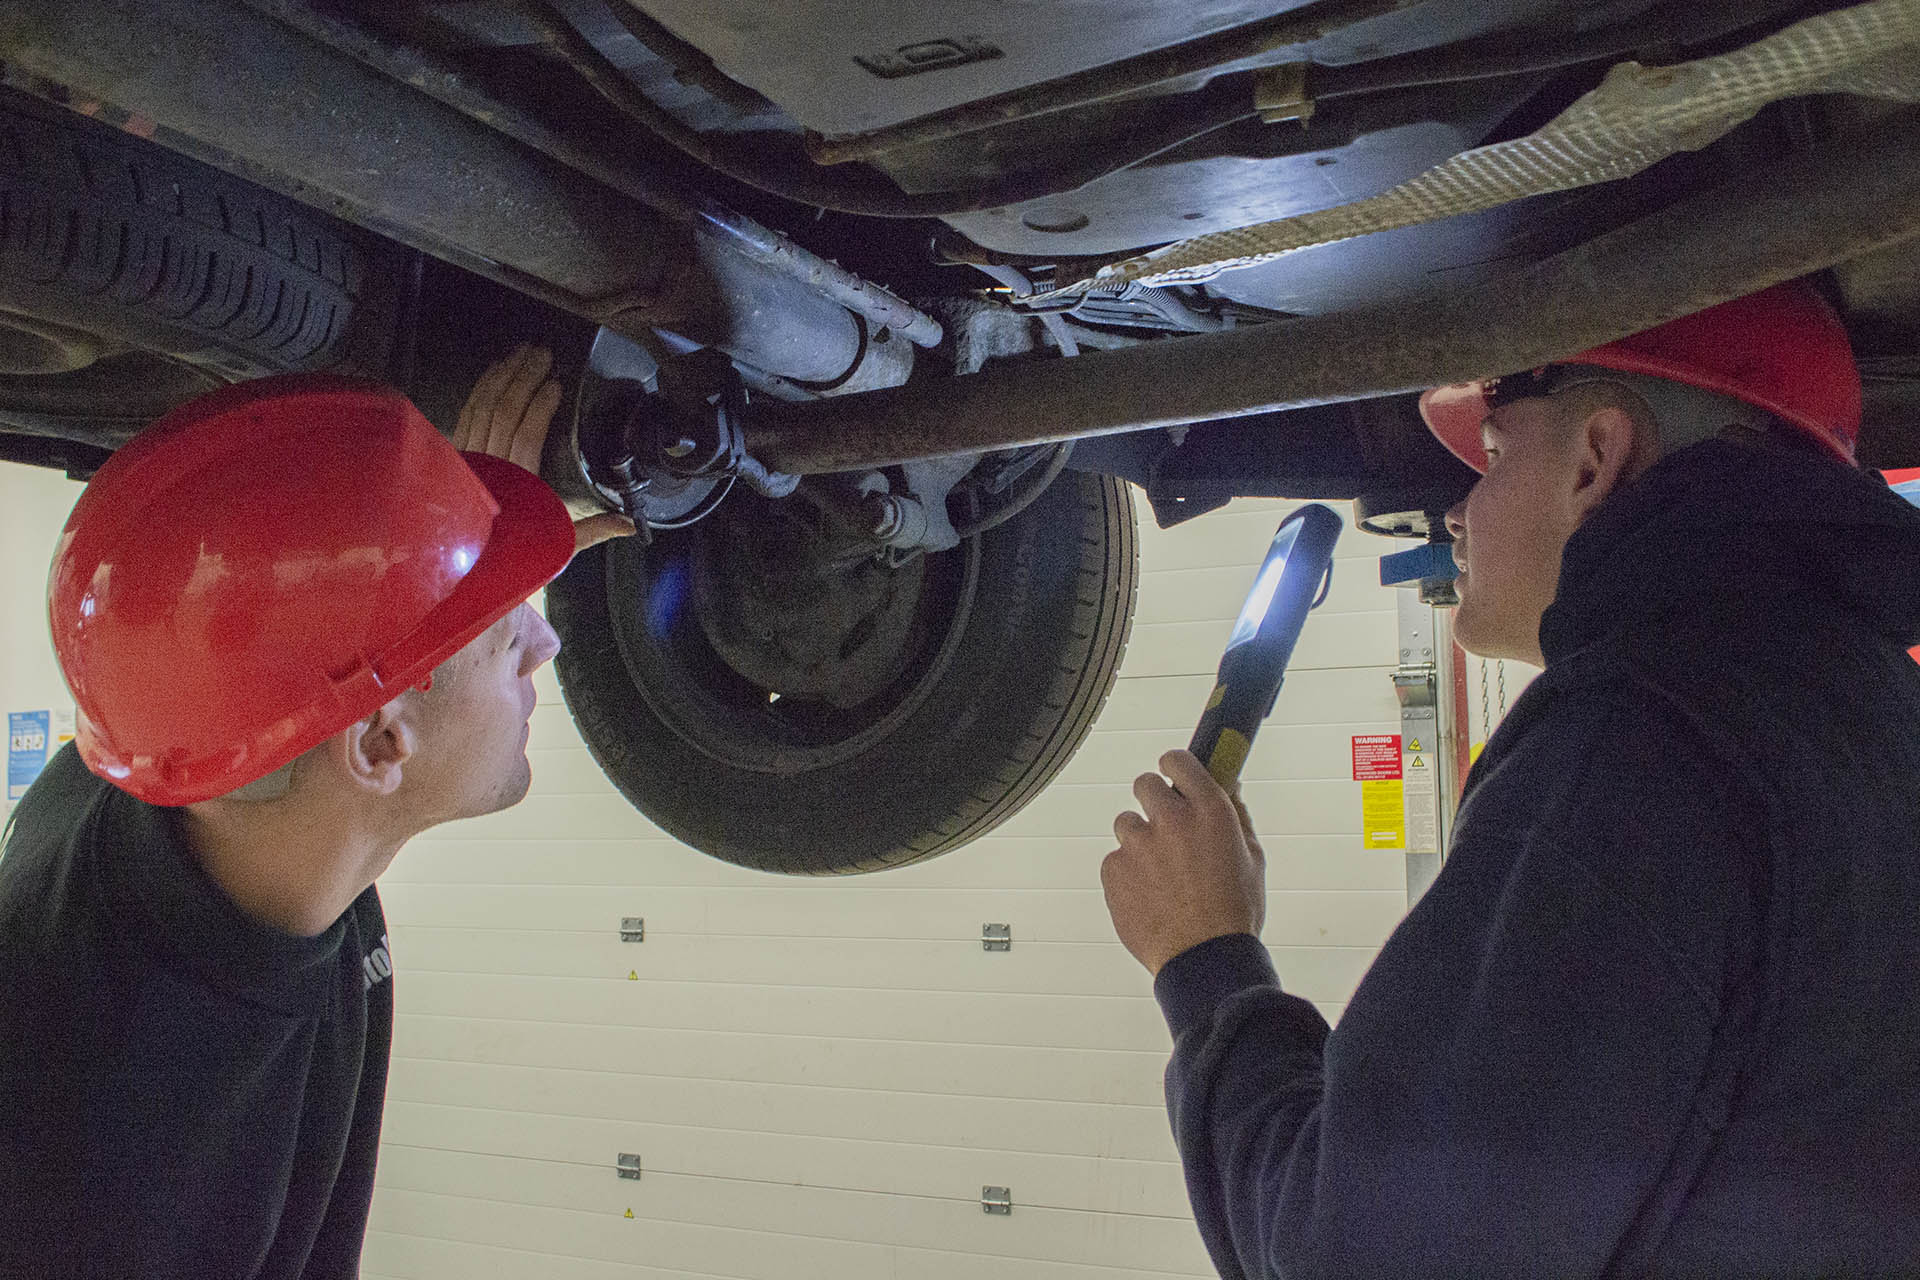 Light Vehicle. Students inspecting the underside of a vehicle